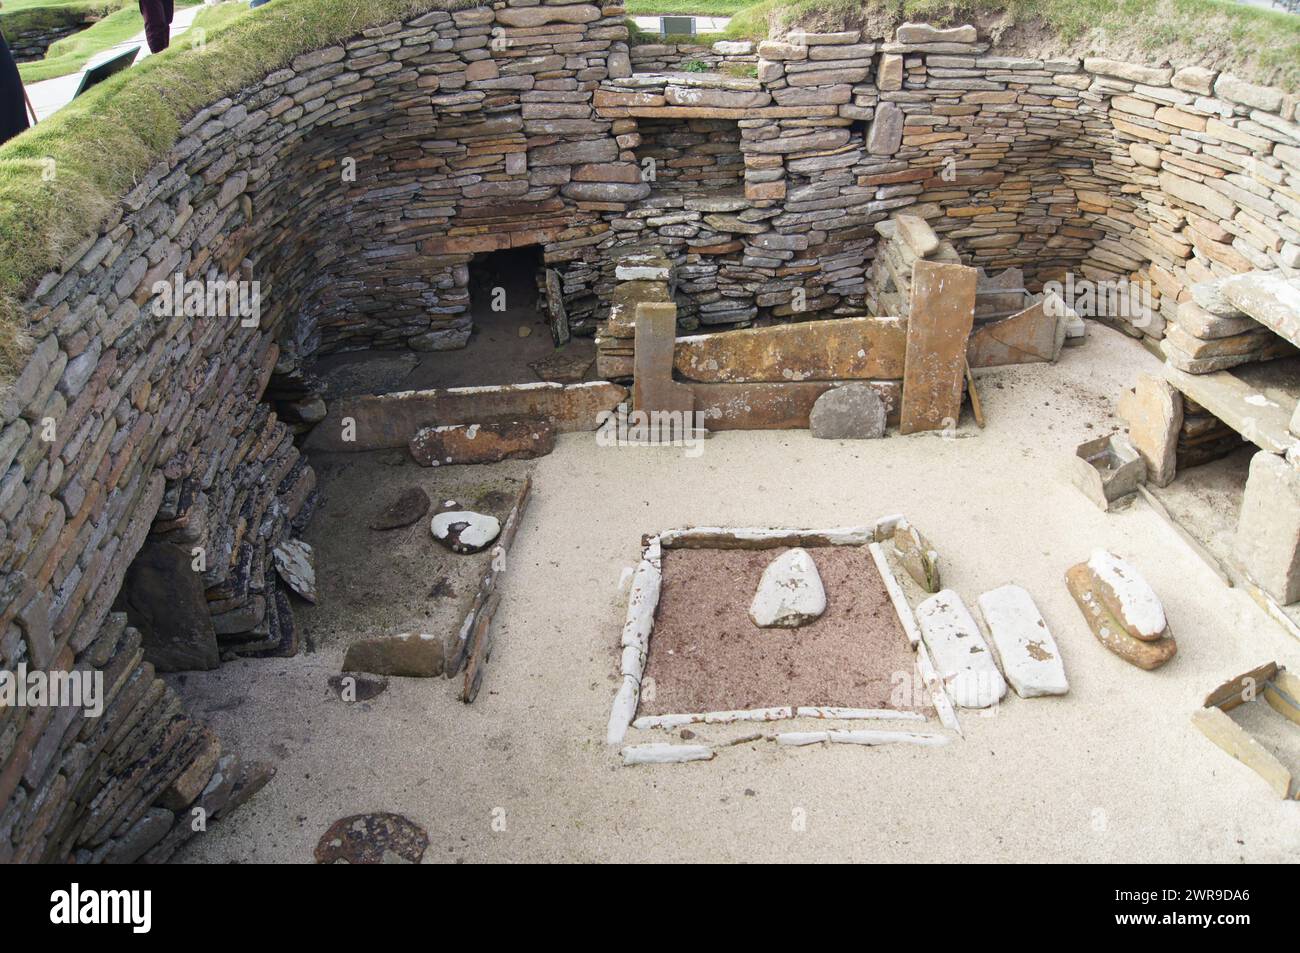 5000 year old Skara Brae stone-built Neolithic settlement, located on the Bay of Skaill, Orkney, Scotland Stock Photo